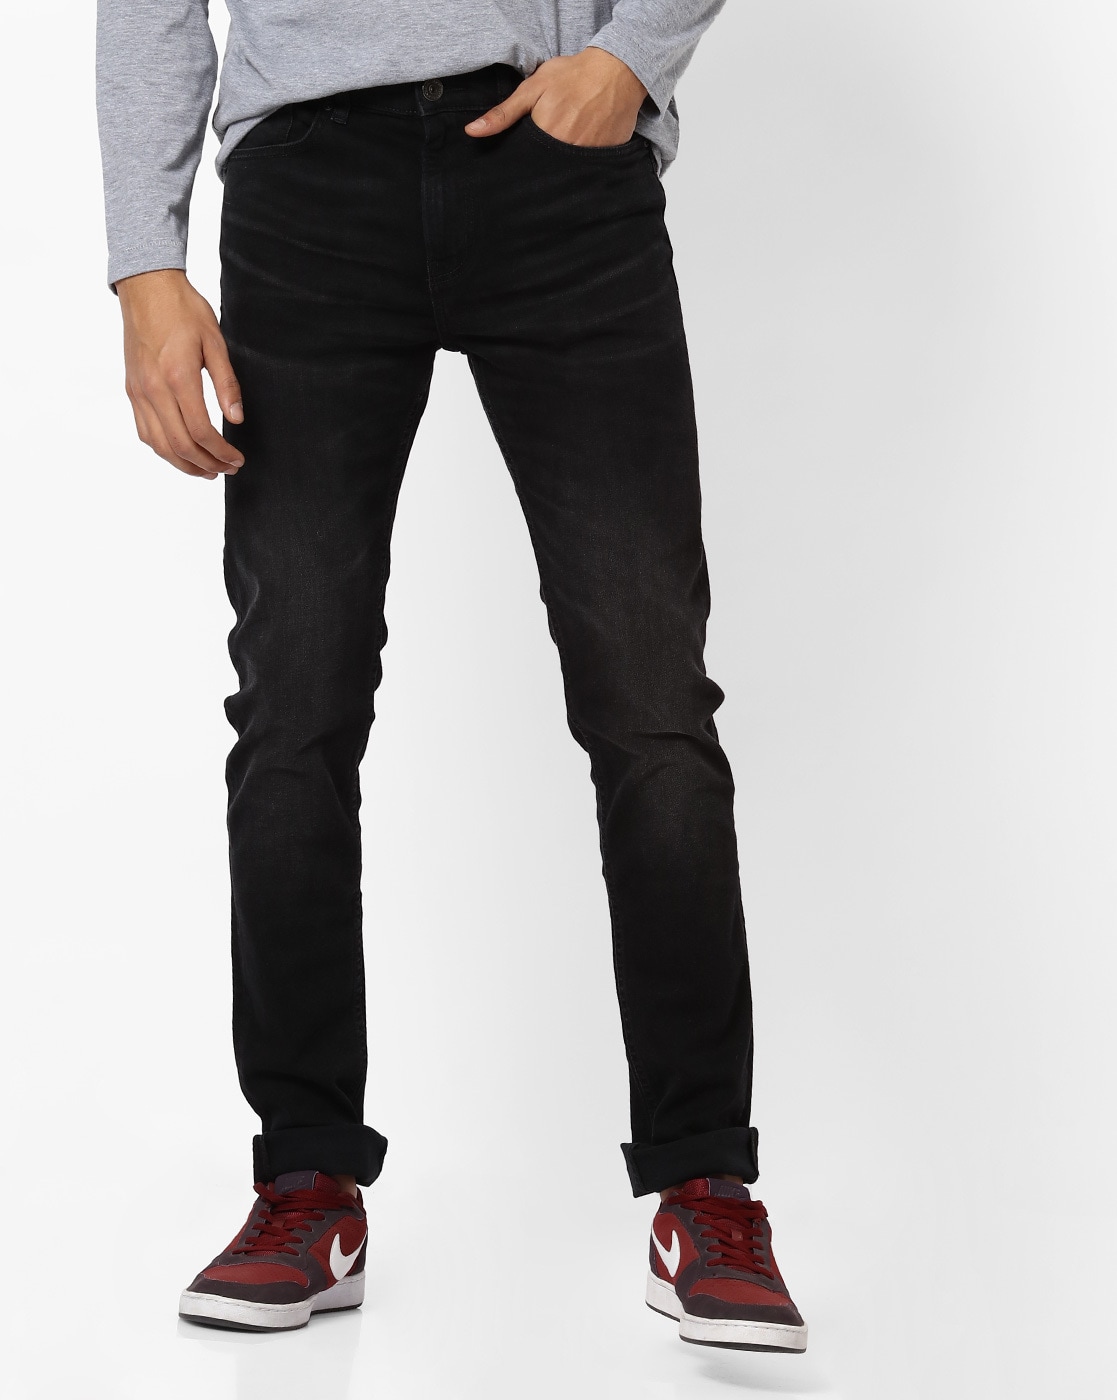 red tape jeans for mens